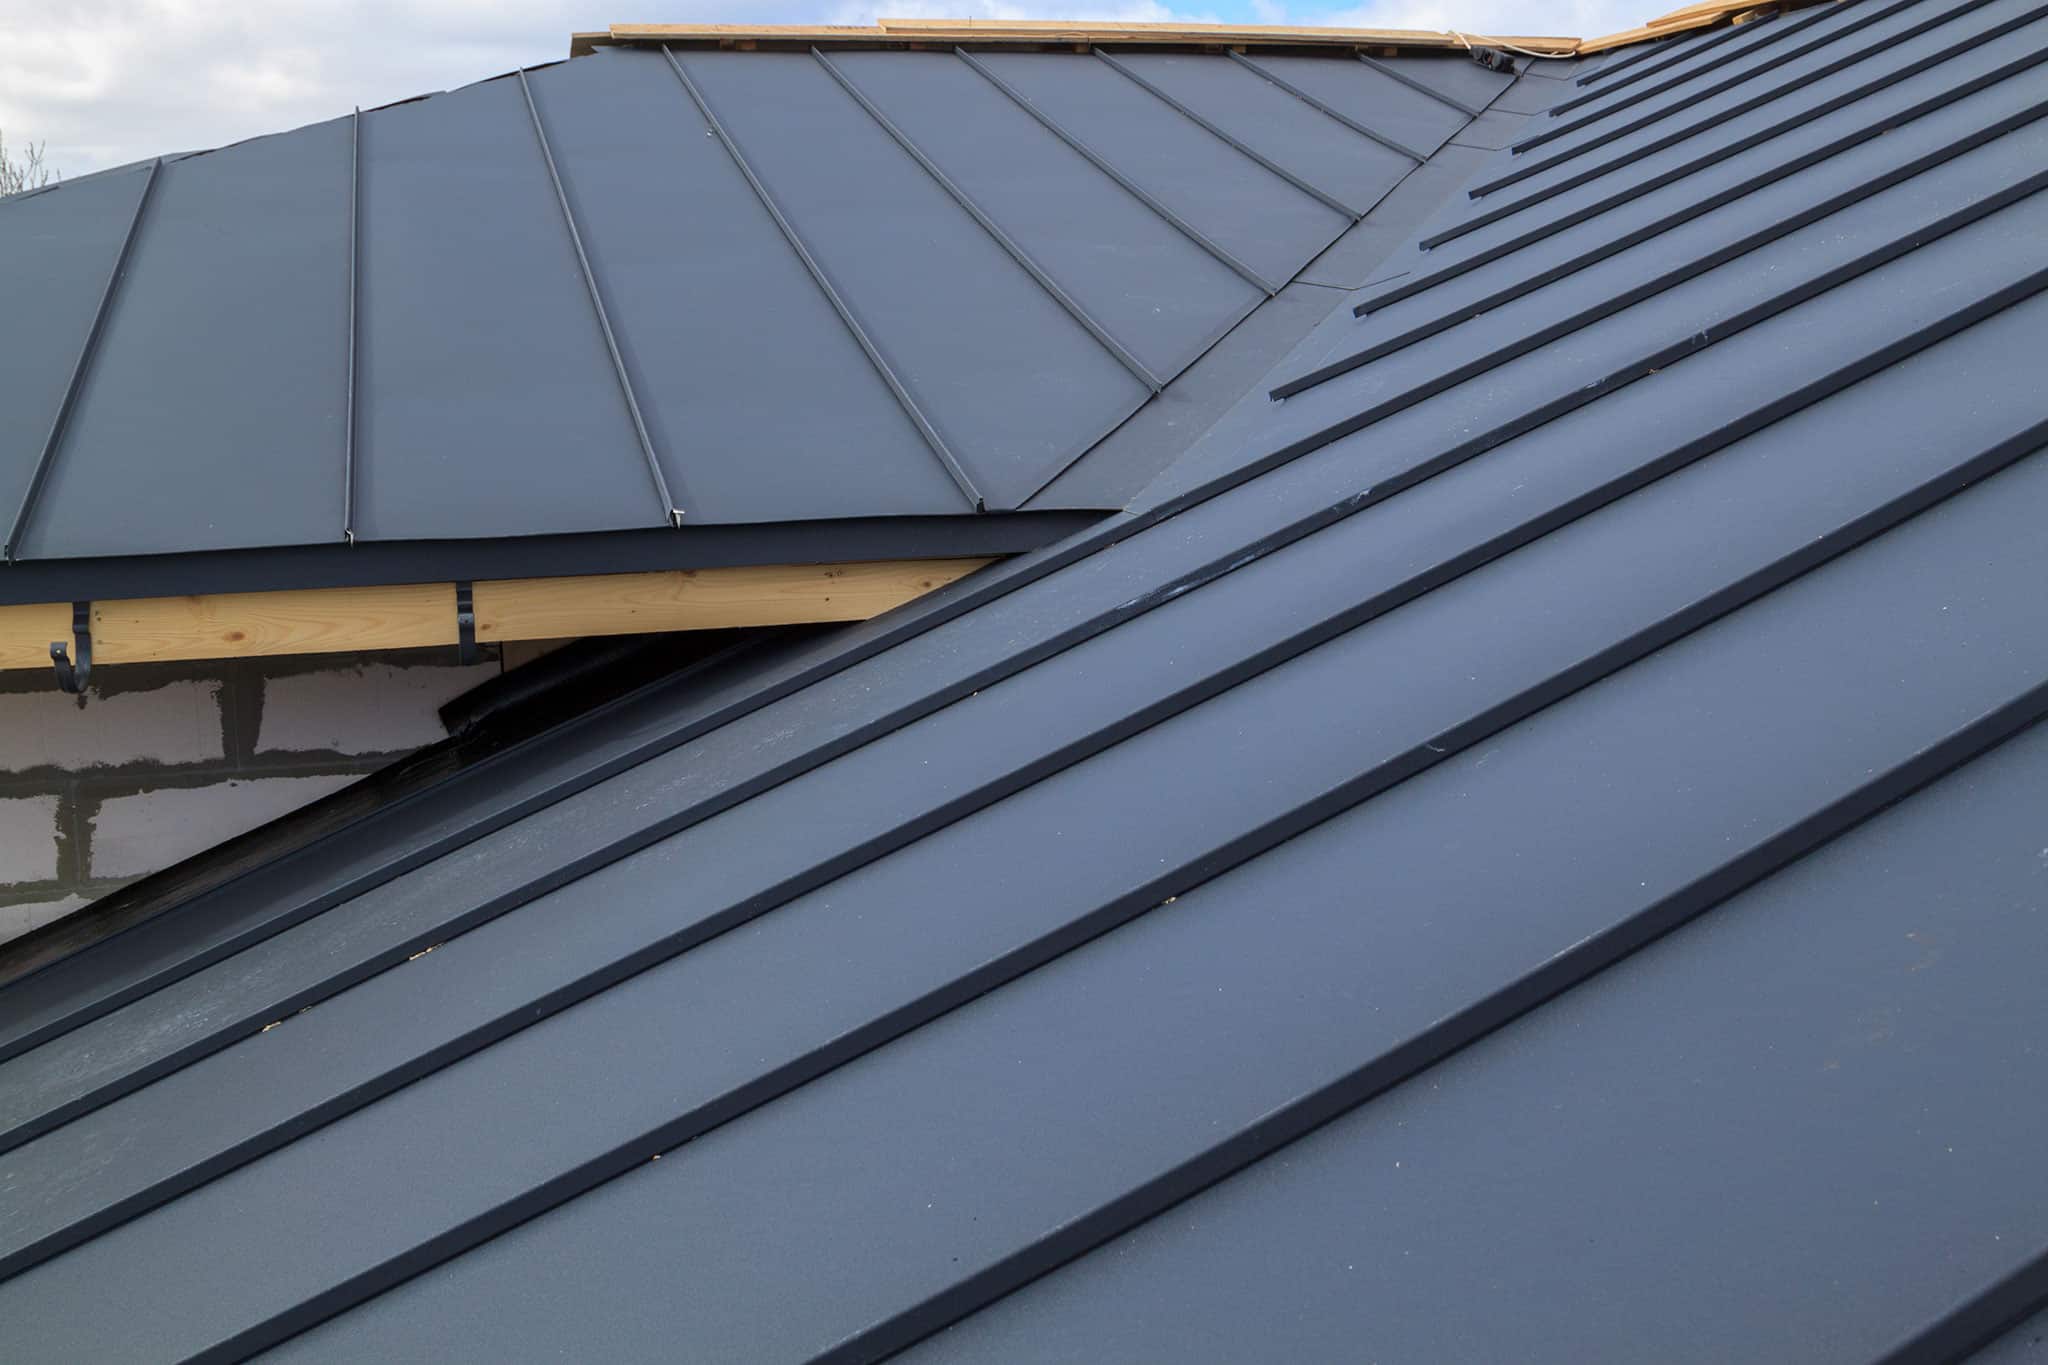 Metal Roofing Omaha, NE - Metal Roofing Experts You Can Trust - Serving  Papillion, Bellevue, Ralston, Elkhorn, Gretna, Bennington, Council Bluffs,  Plattsmouth - Price Affordable Corrugated Metal, Galvanized Steel Roofing,  16 Foot